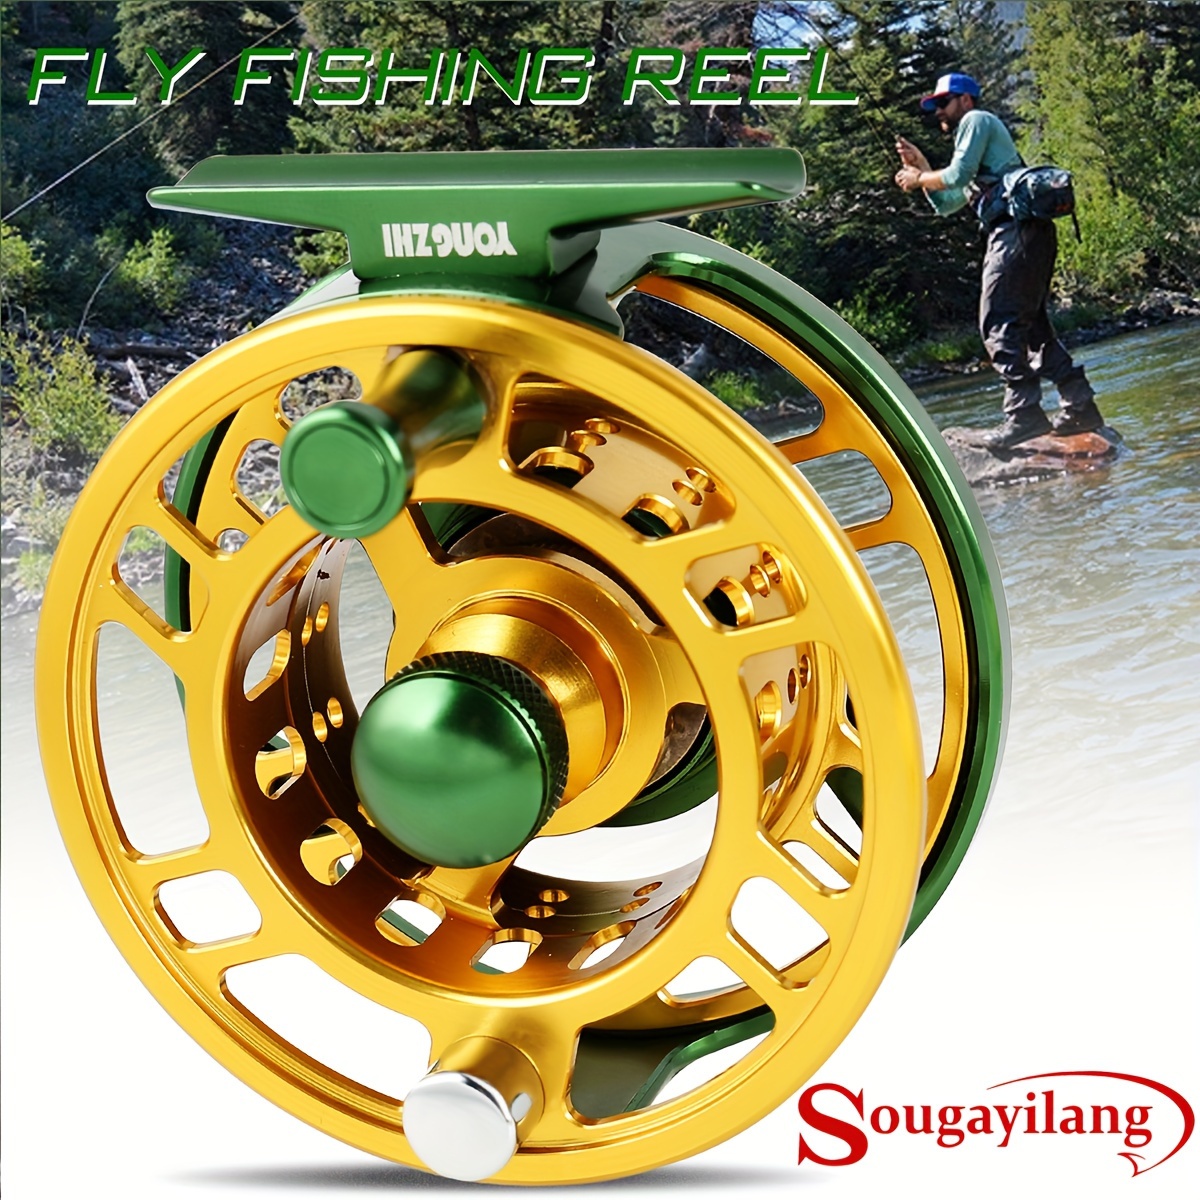  Sougayilang Fly Fishing Rod and Reel Combo, 4-Piece Fly Rod  and Aluminum Alloy Reel Complete Starter Package with Rod Bag-Blue-#5 :  Sports & Outdoors